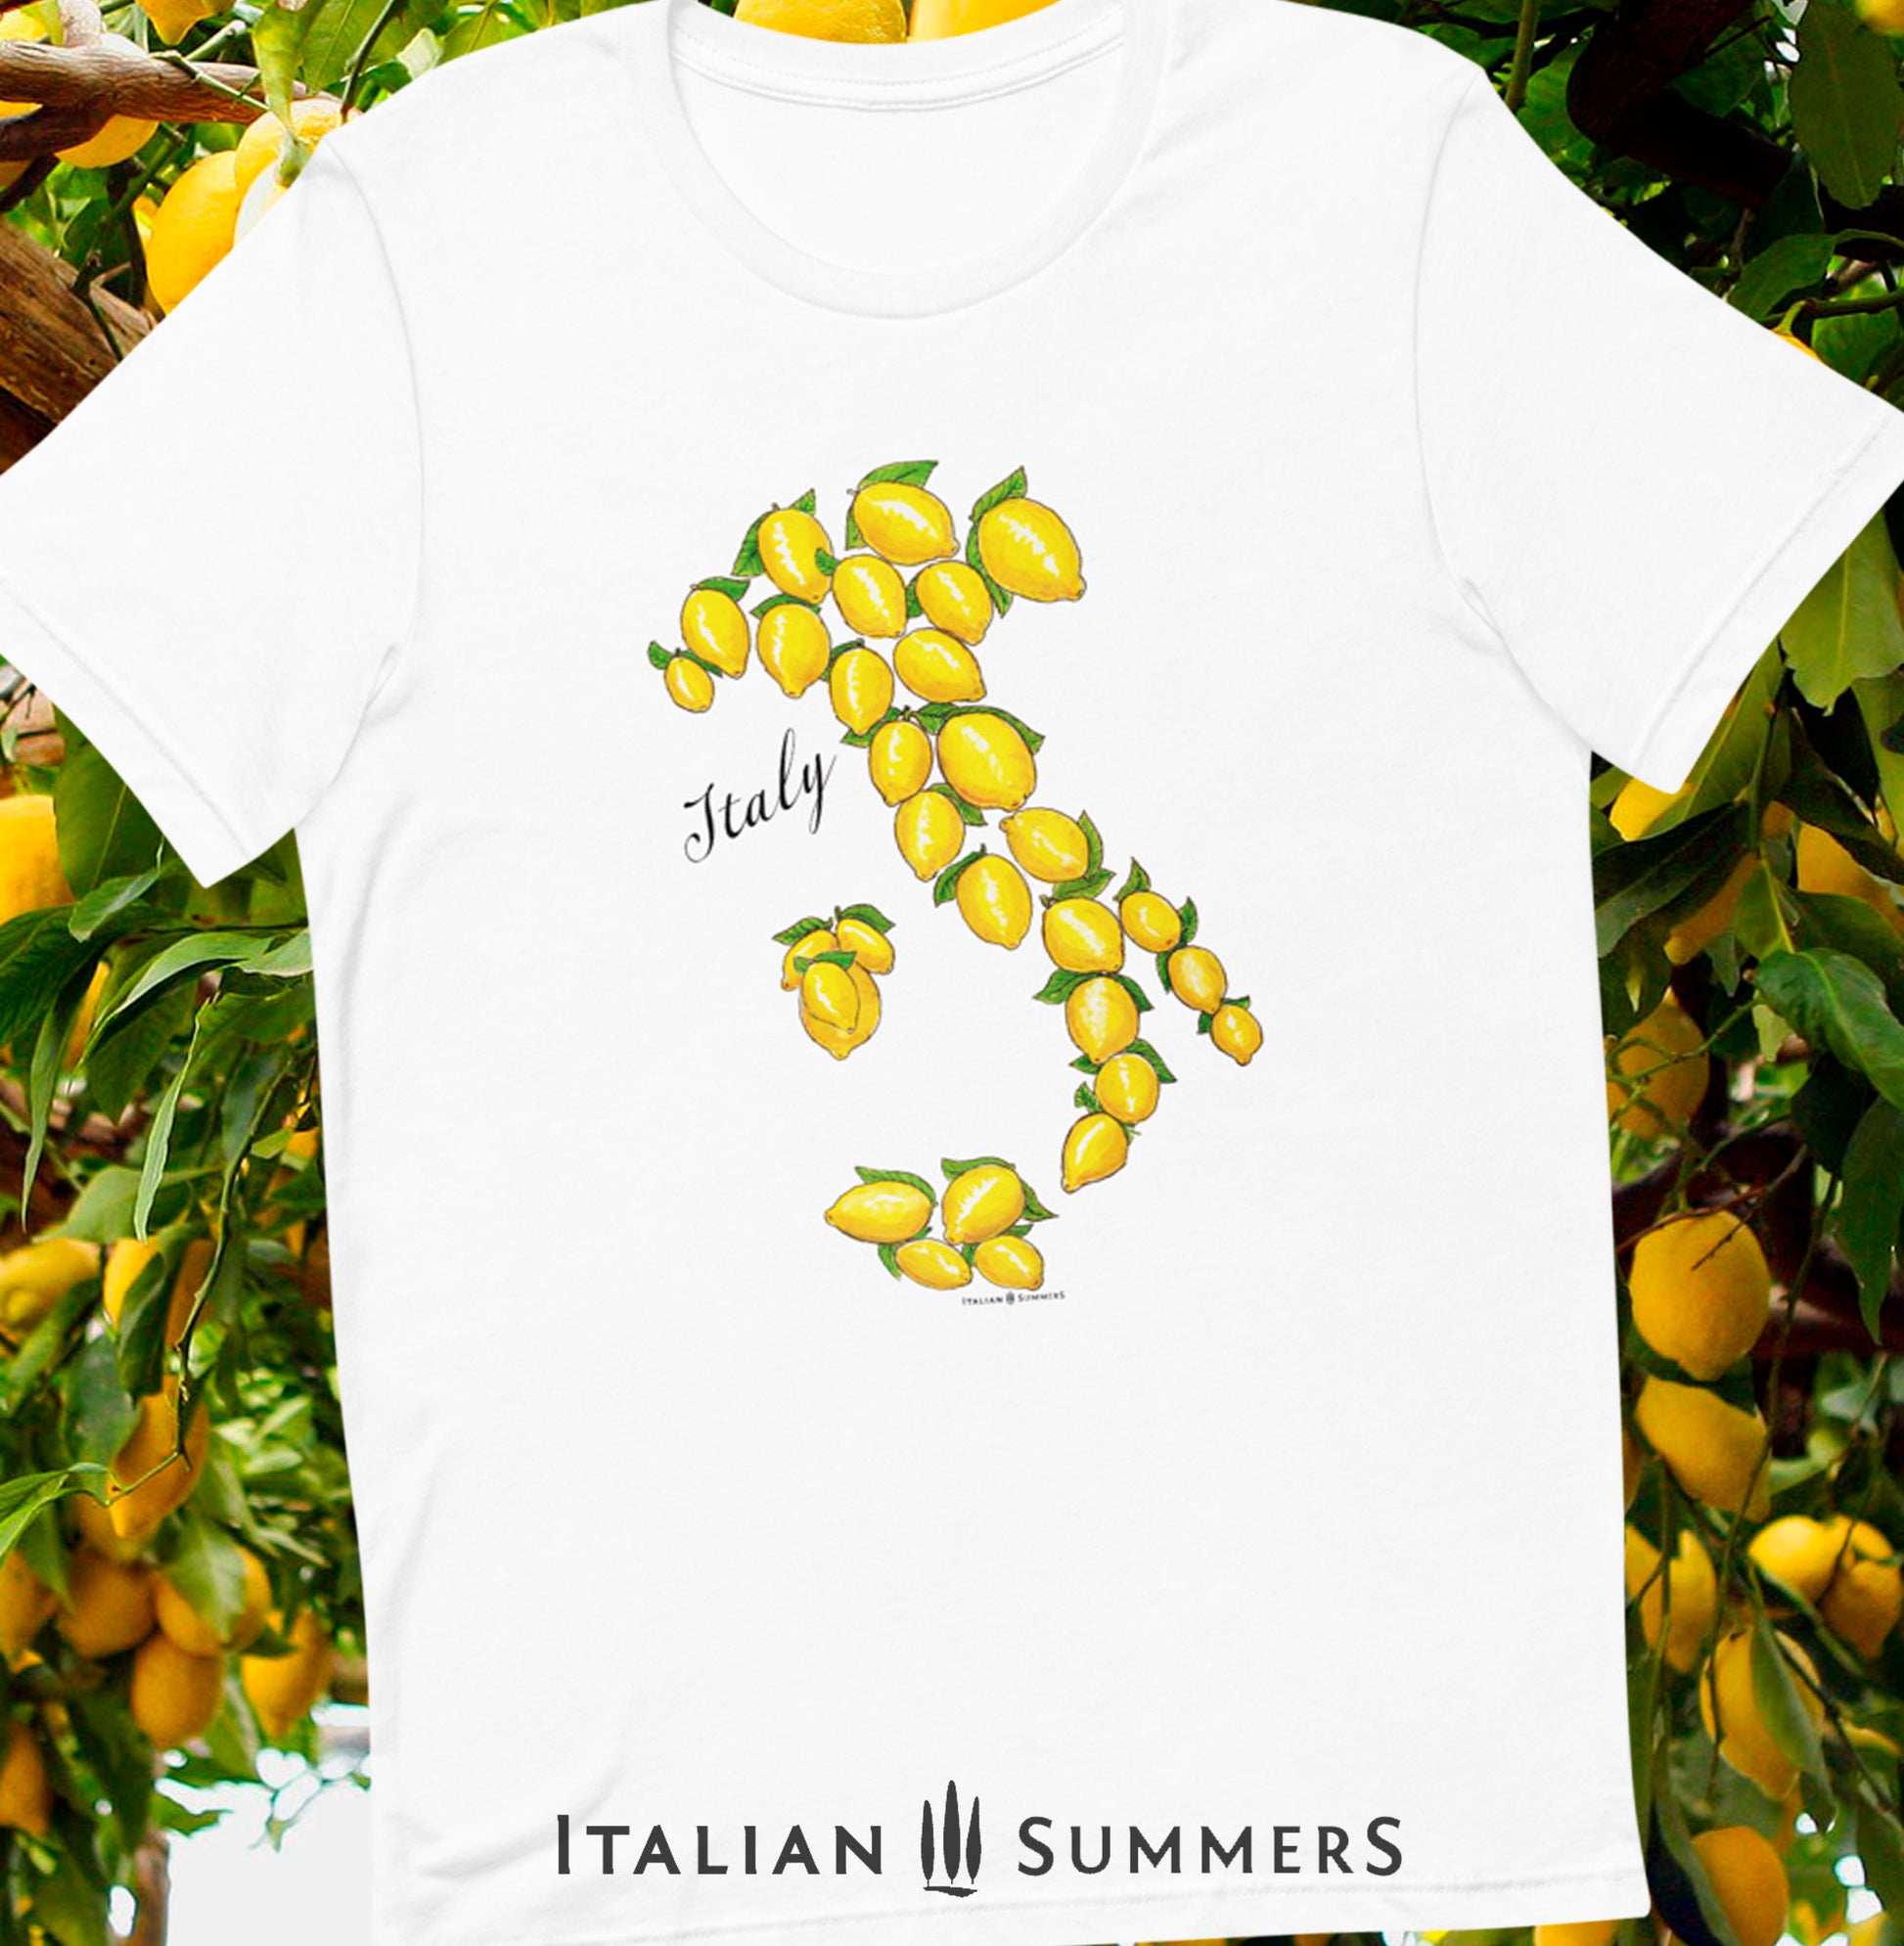 Unisex crew-neck Italy-inspire cotton T shirt with a print of the shape of the country of Italy composed of sunny Sorrento Lemons, an original design by Italian Summers